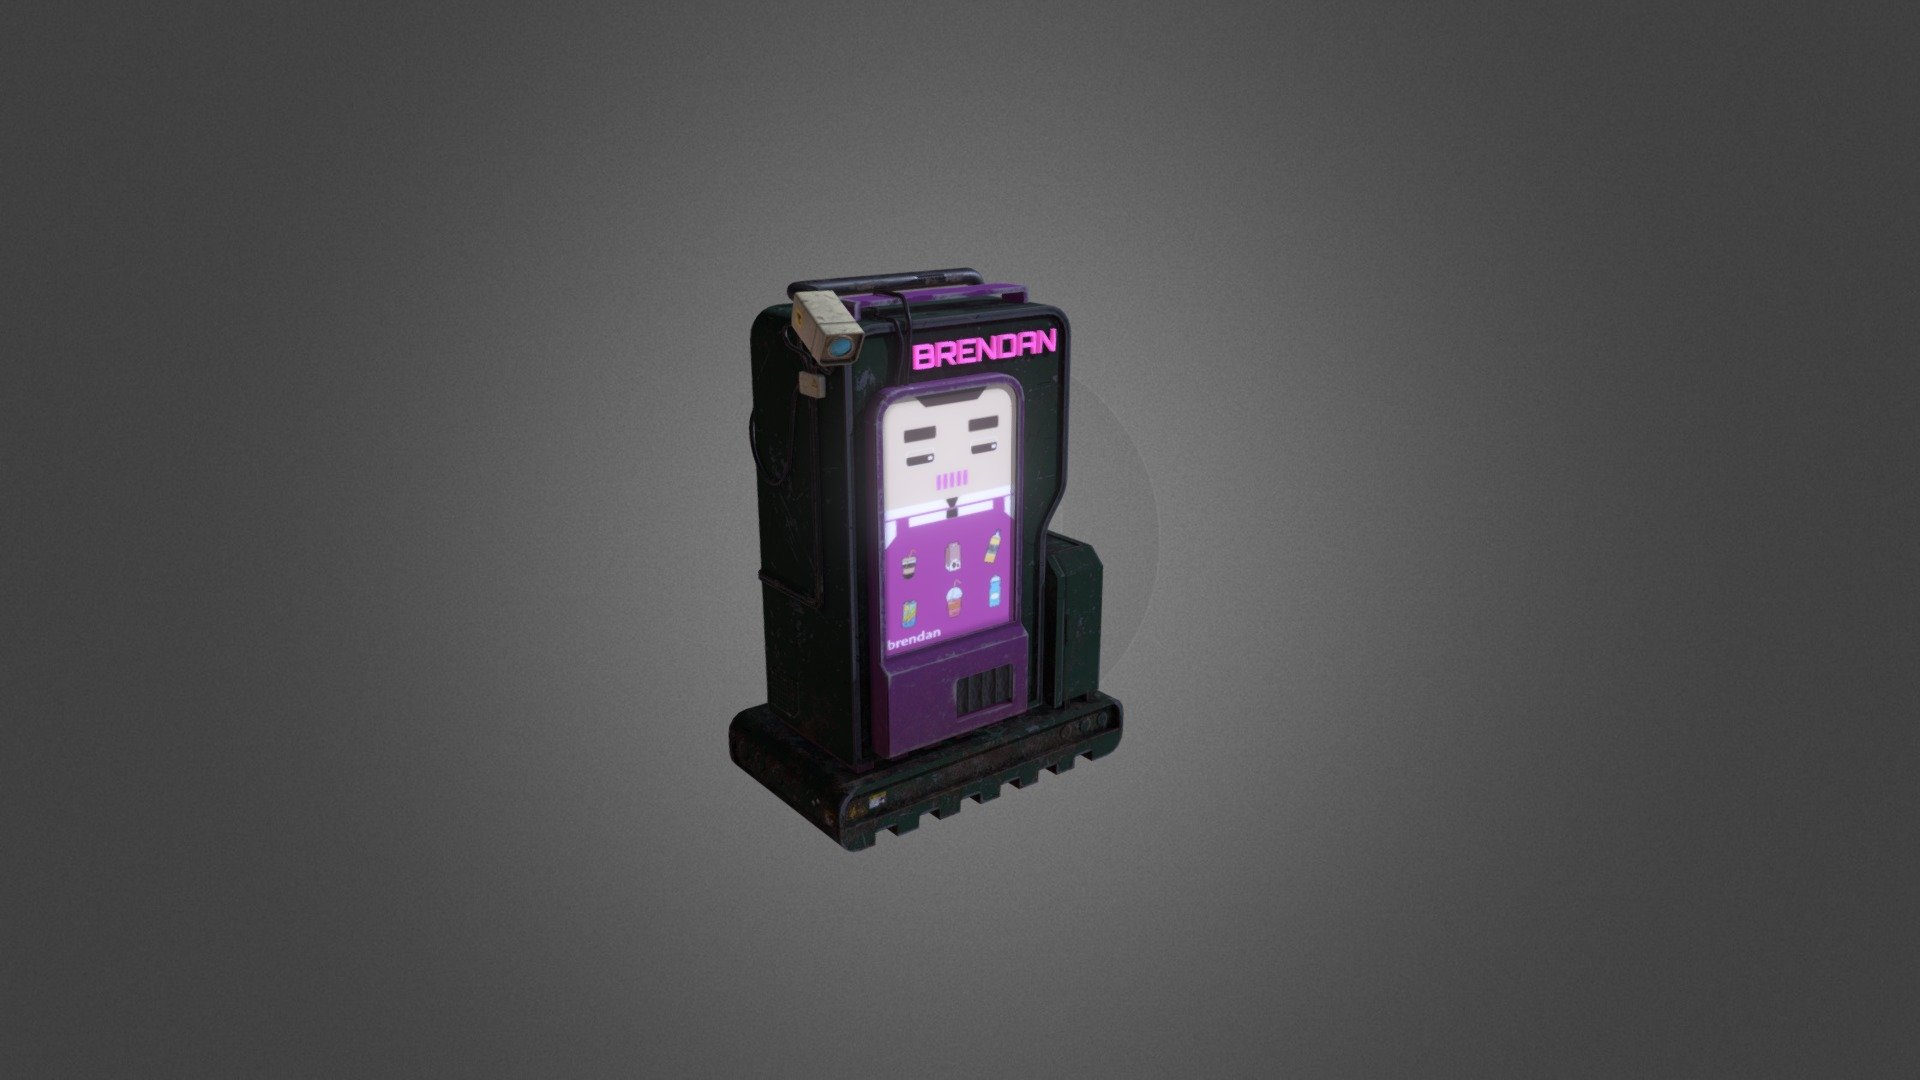 Asset for the  course “Digital Asset Creation for Games”. The task was to create an asset for a game of our choosing.
I decided to create a remodel of brendan the vending machine. The concept is based on concept art i found on the internet.

I created this piece with blender and substance painter 3d model